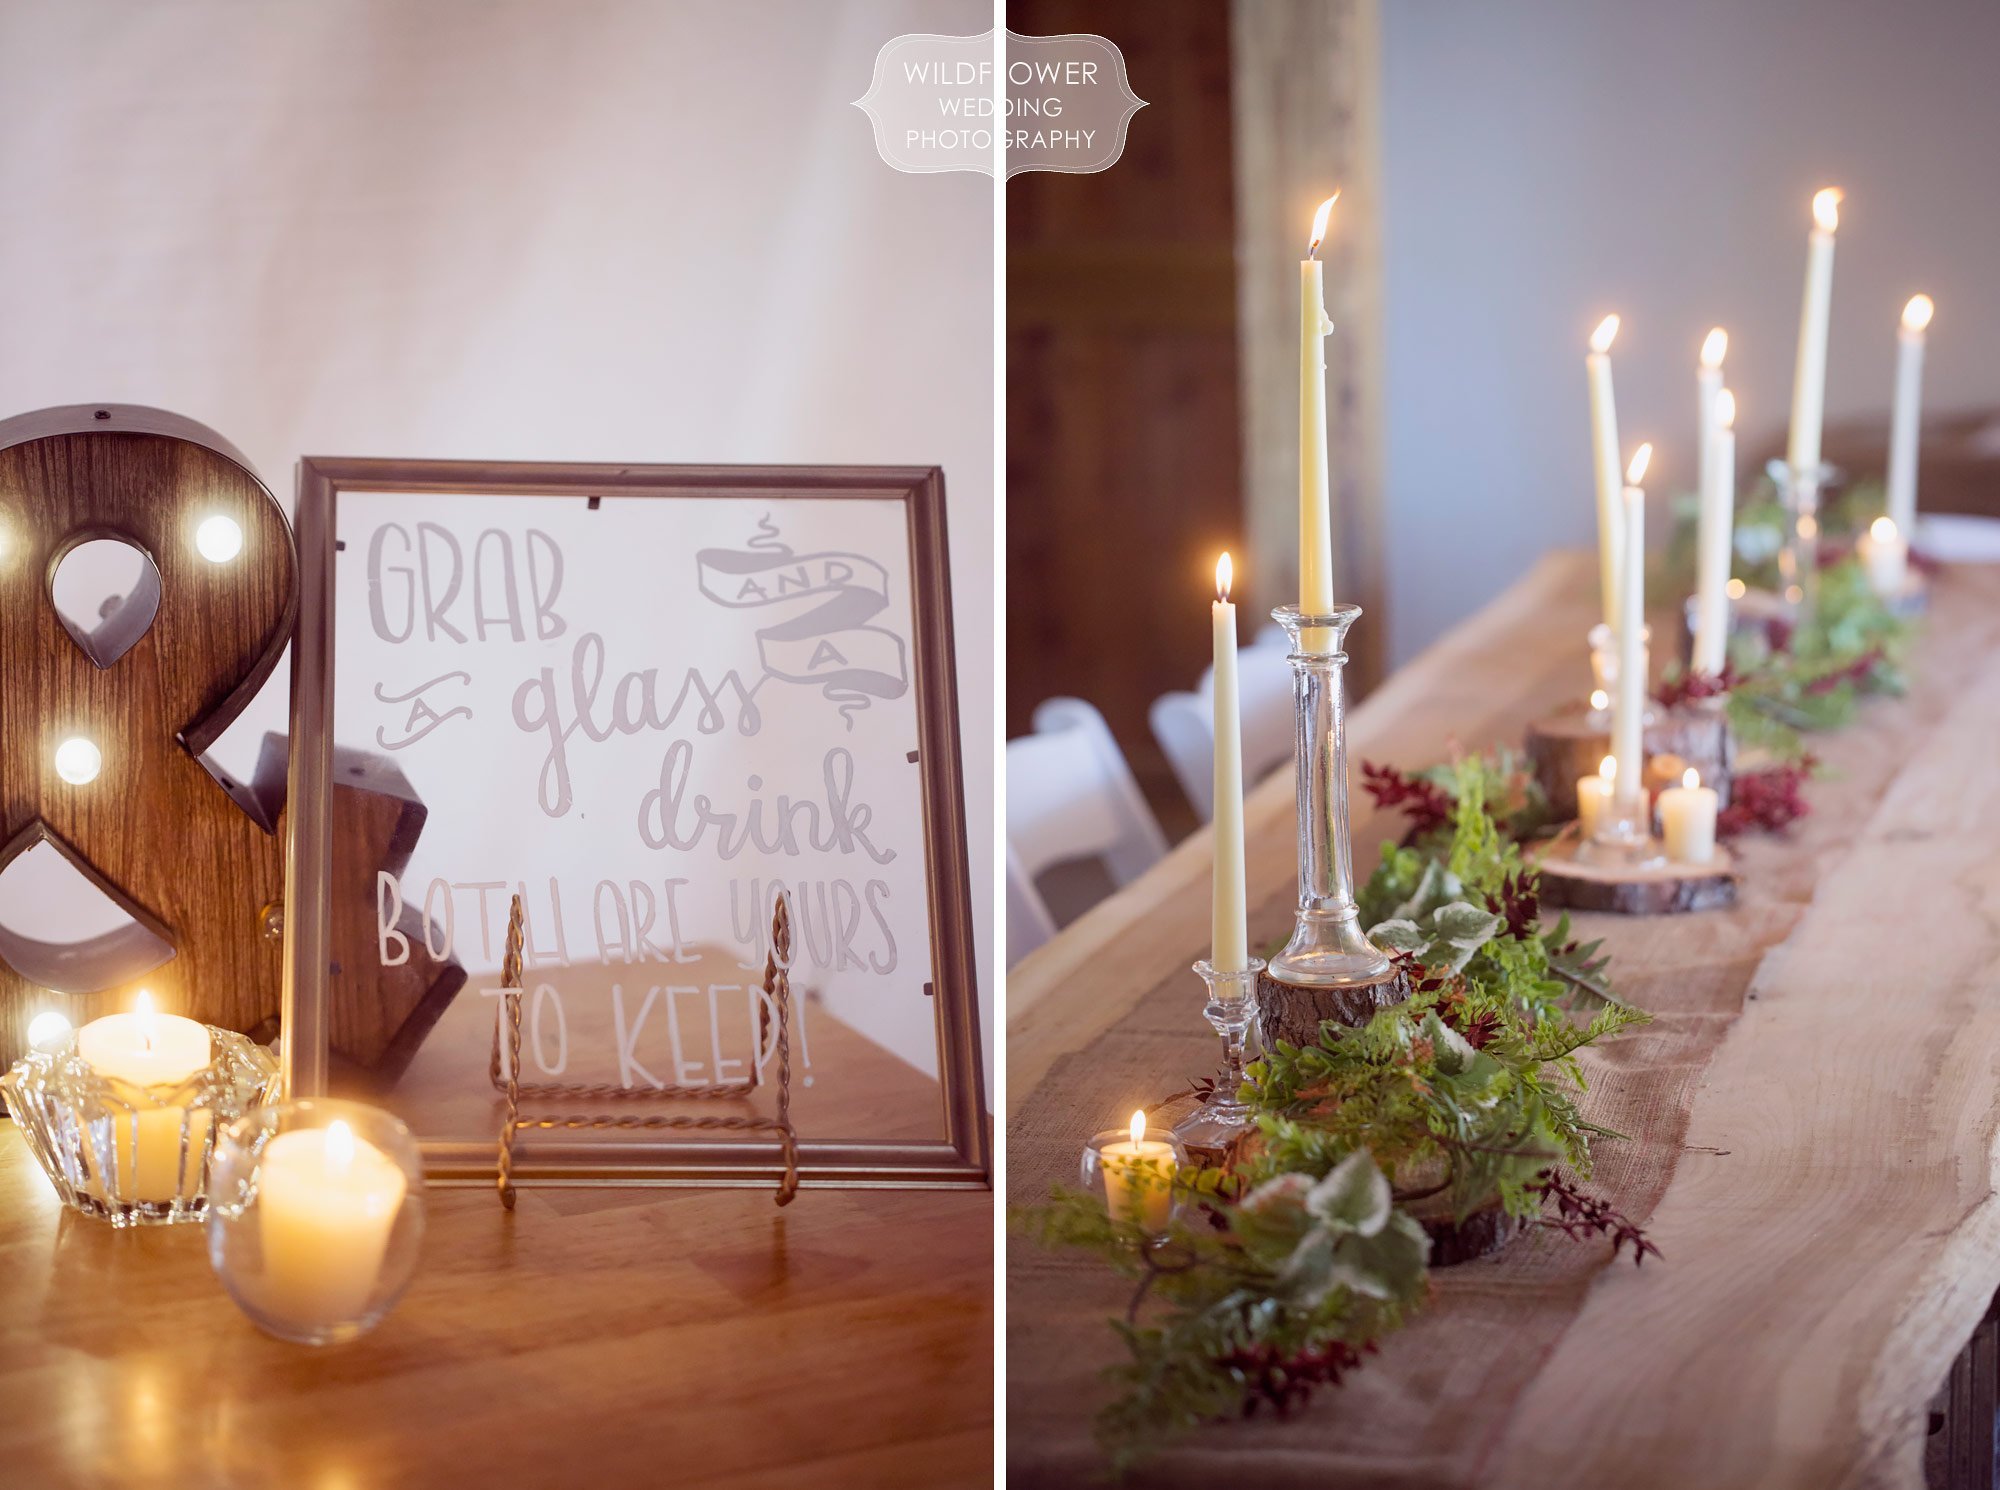 Candles and green garlands line this harvest table at this winter wedding in MO.